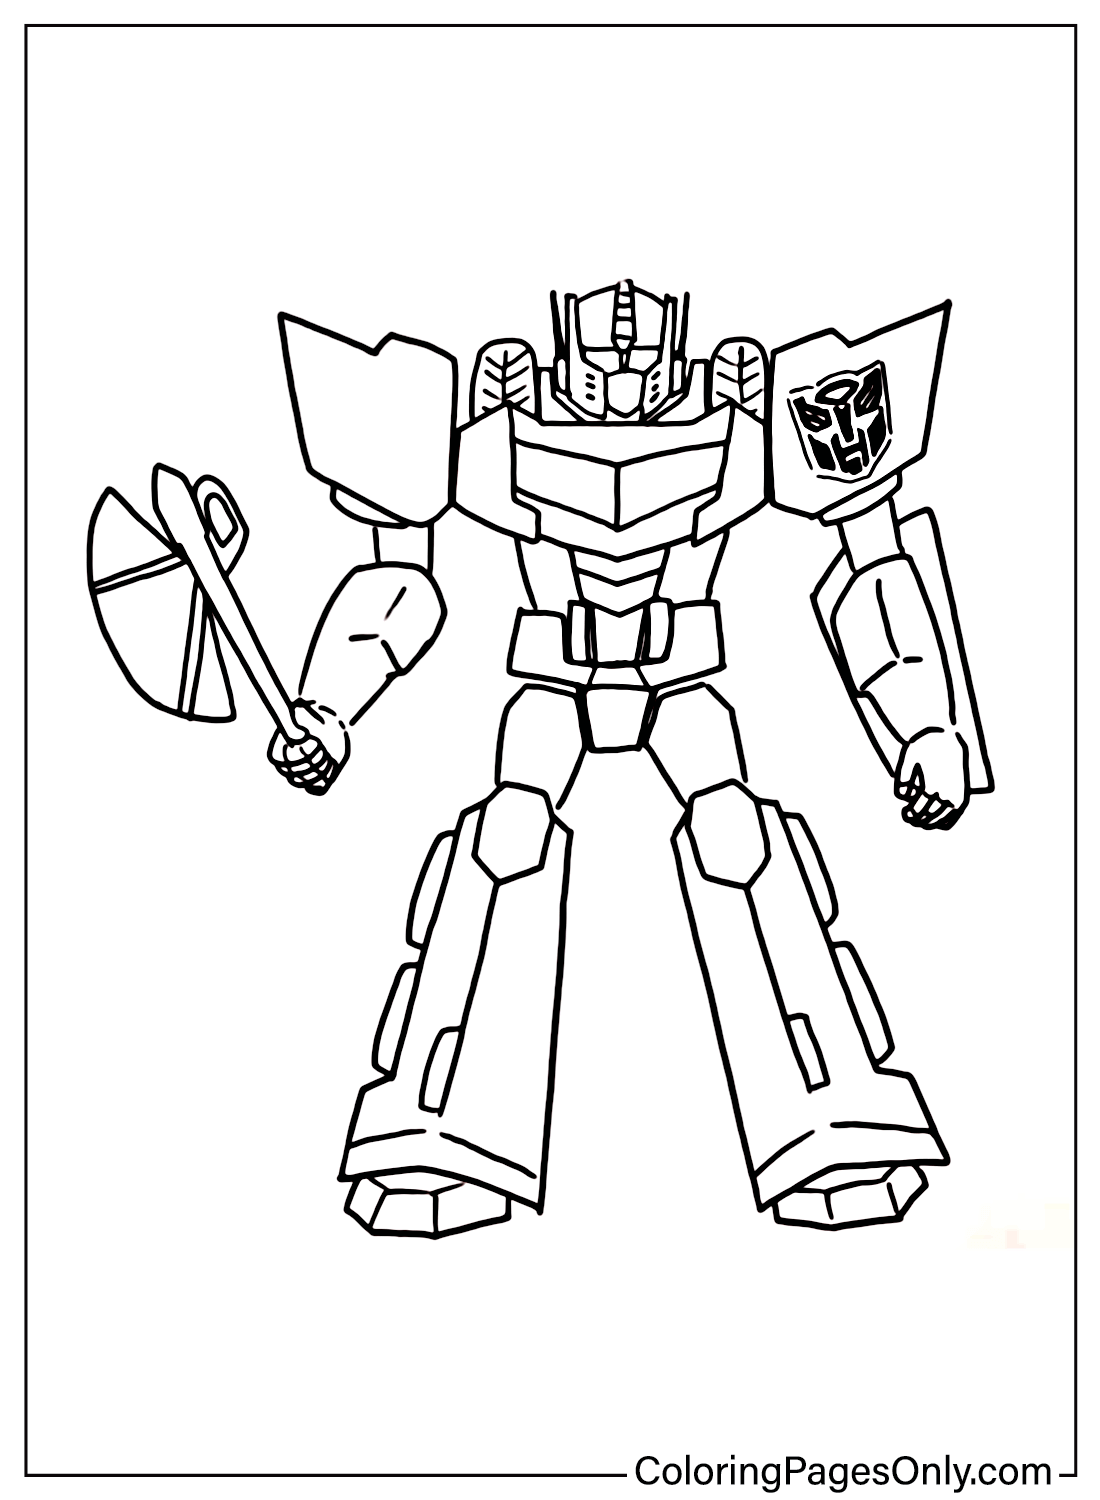 Coloring Pages Optimus Prime Free from Transformers: The Last Knight